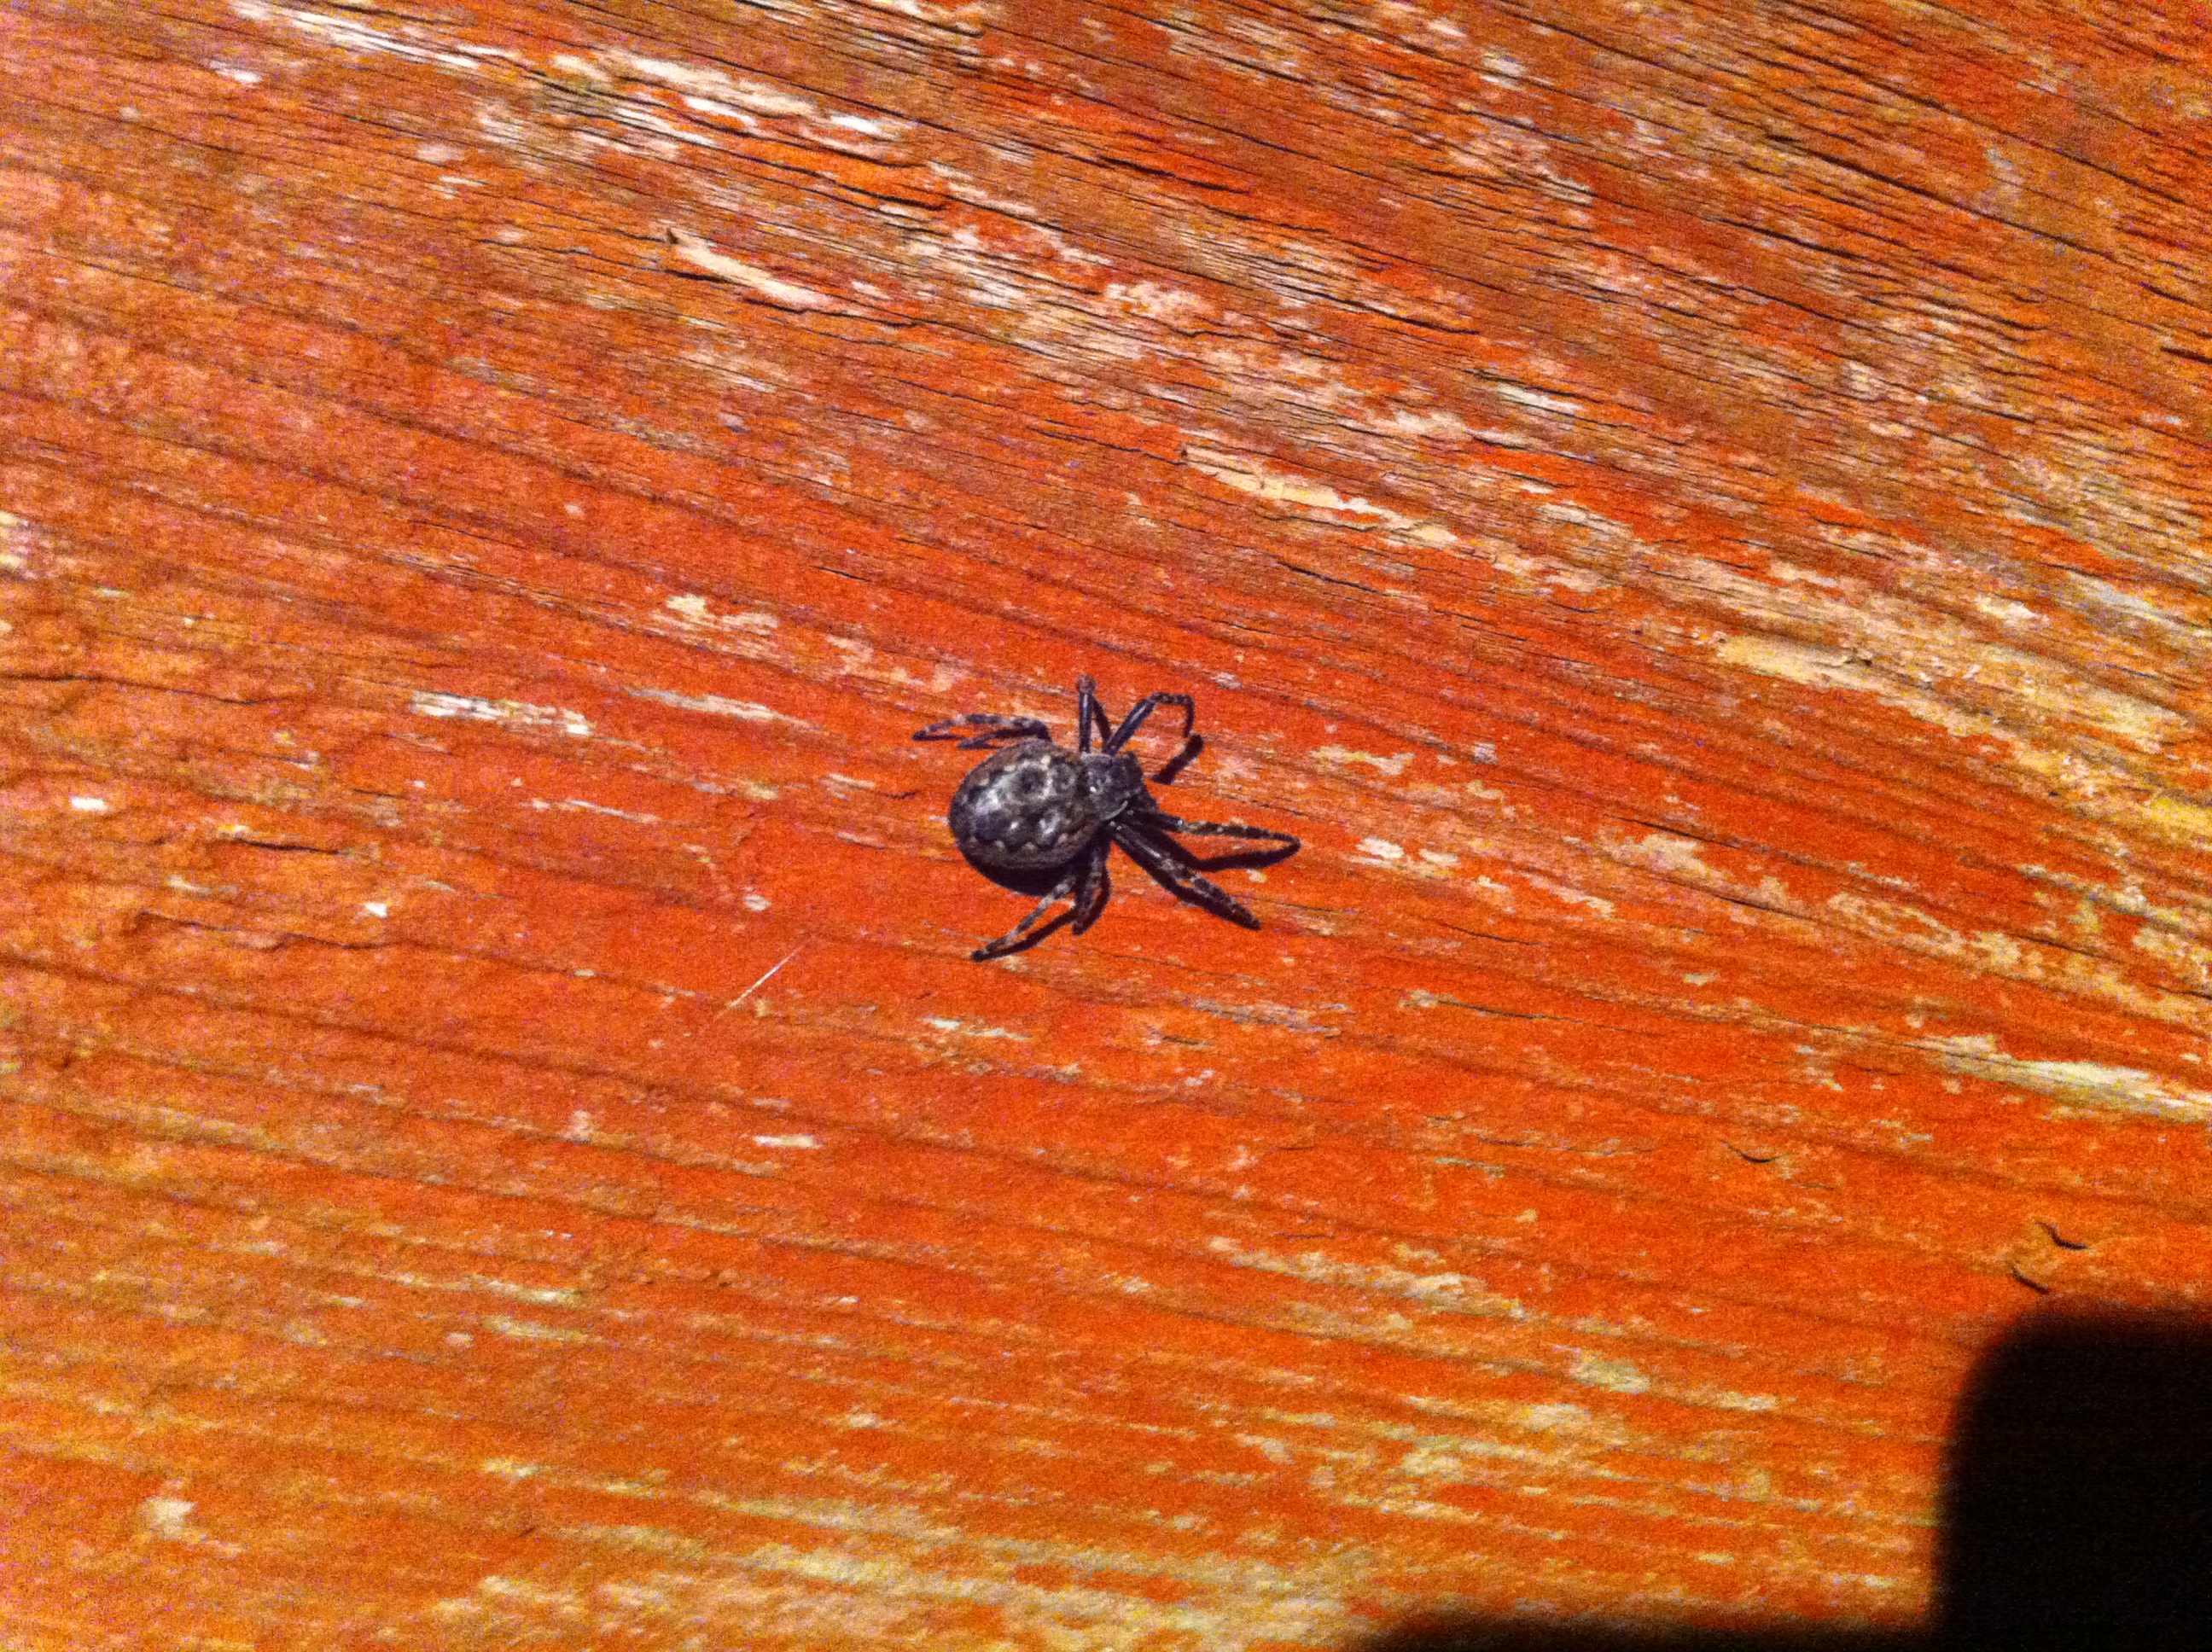 Can anyone recognize this spider?